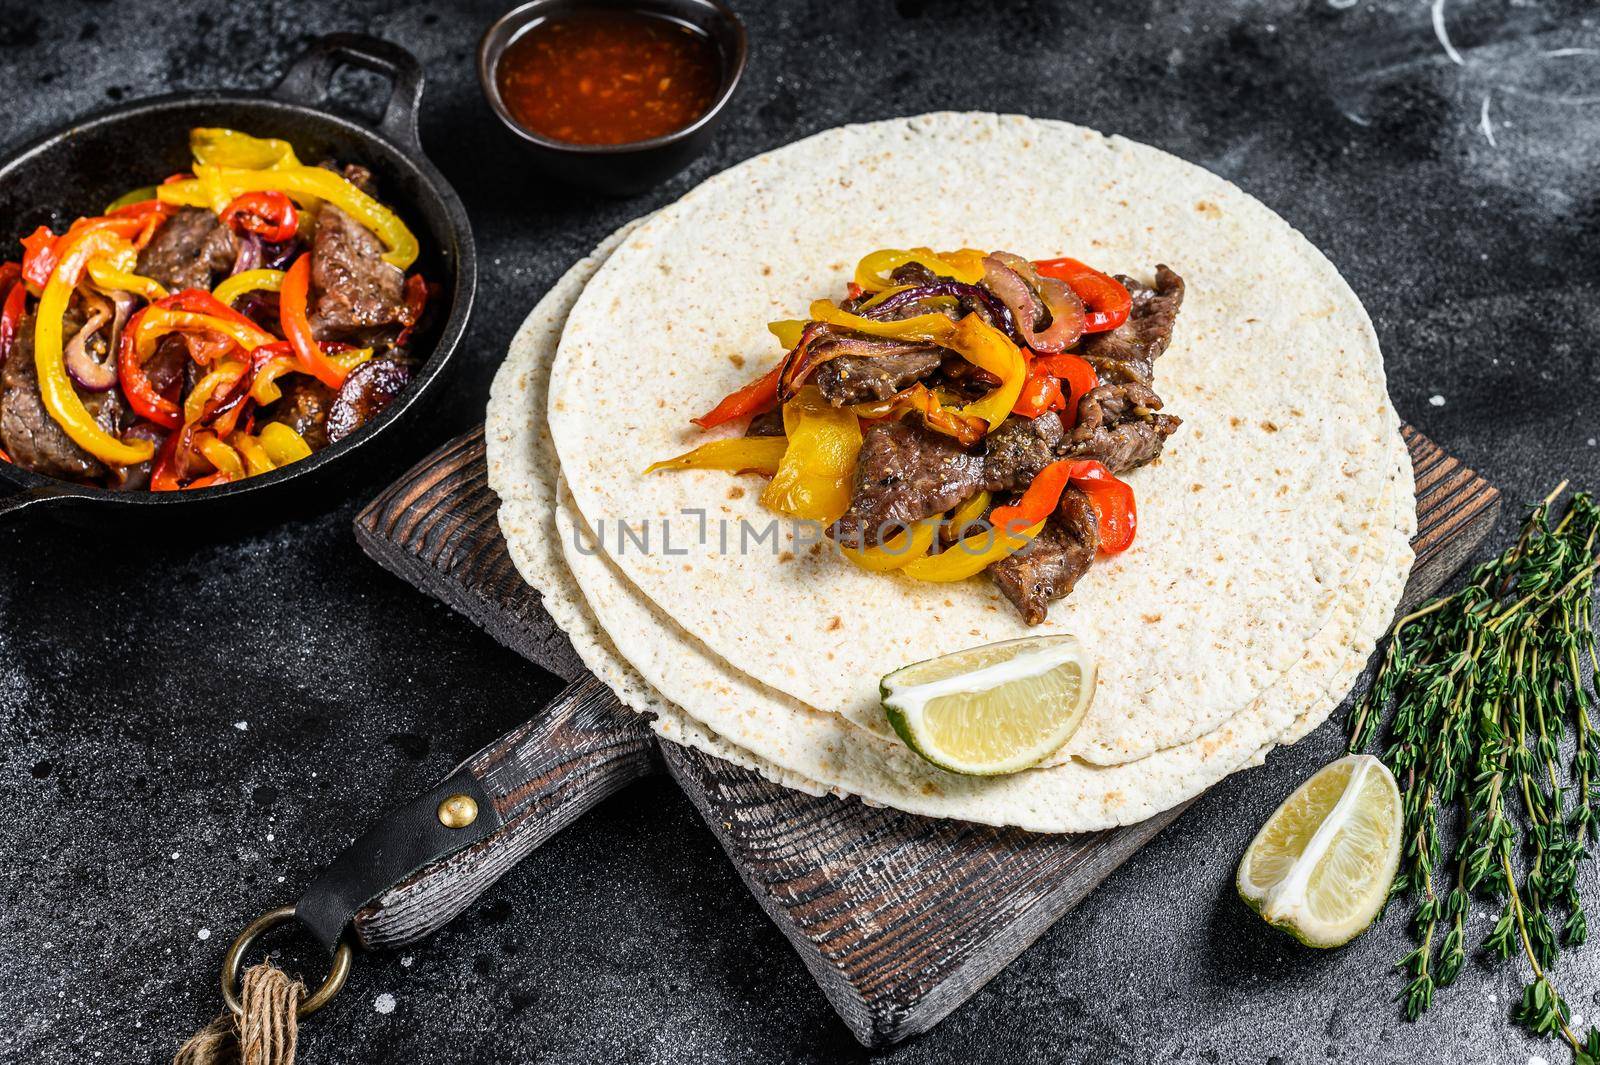 Mexican Fajitas with colored pepper and onions, served with tortillas and salsa. Black background. Top view.